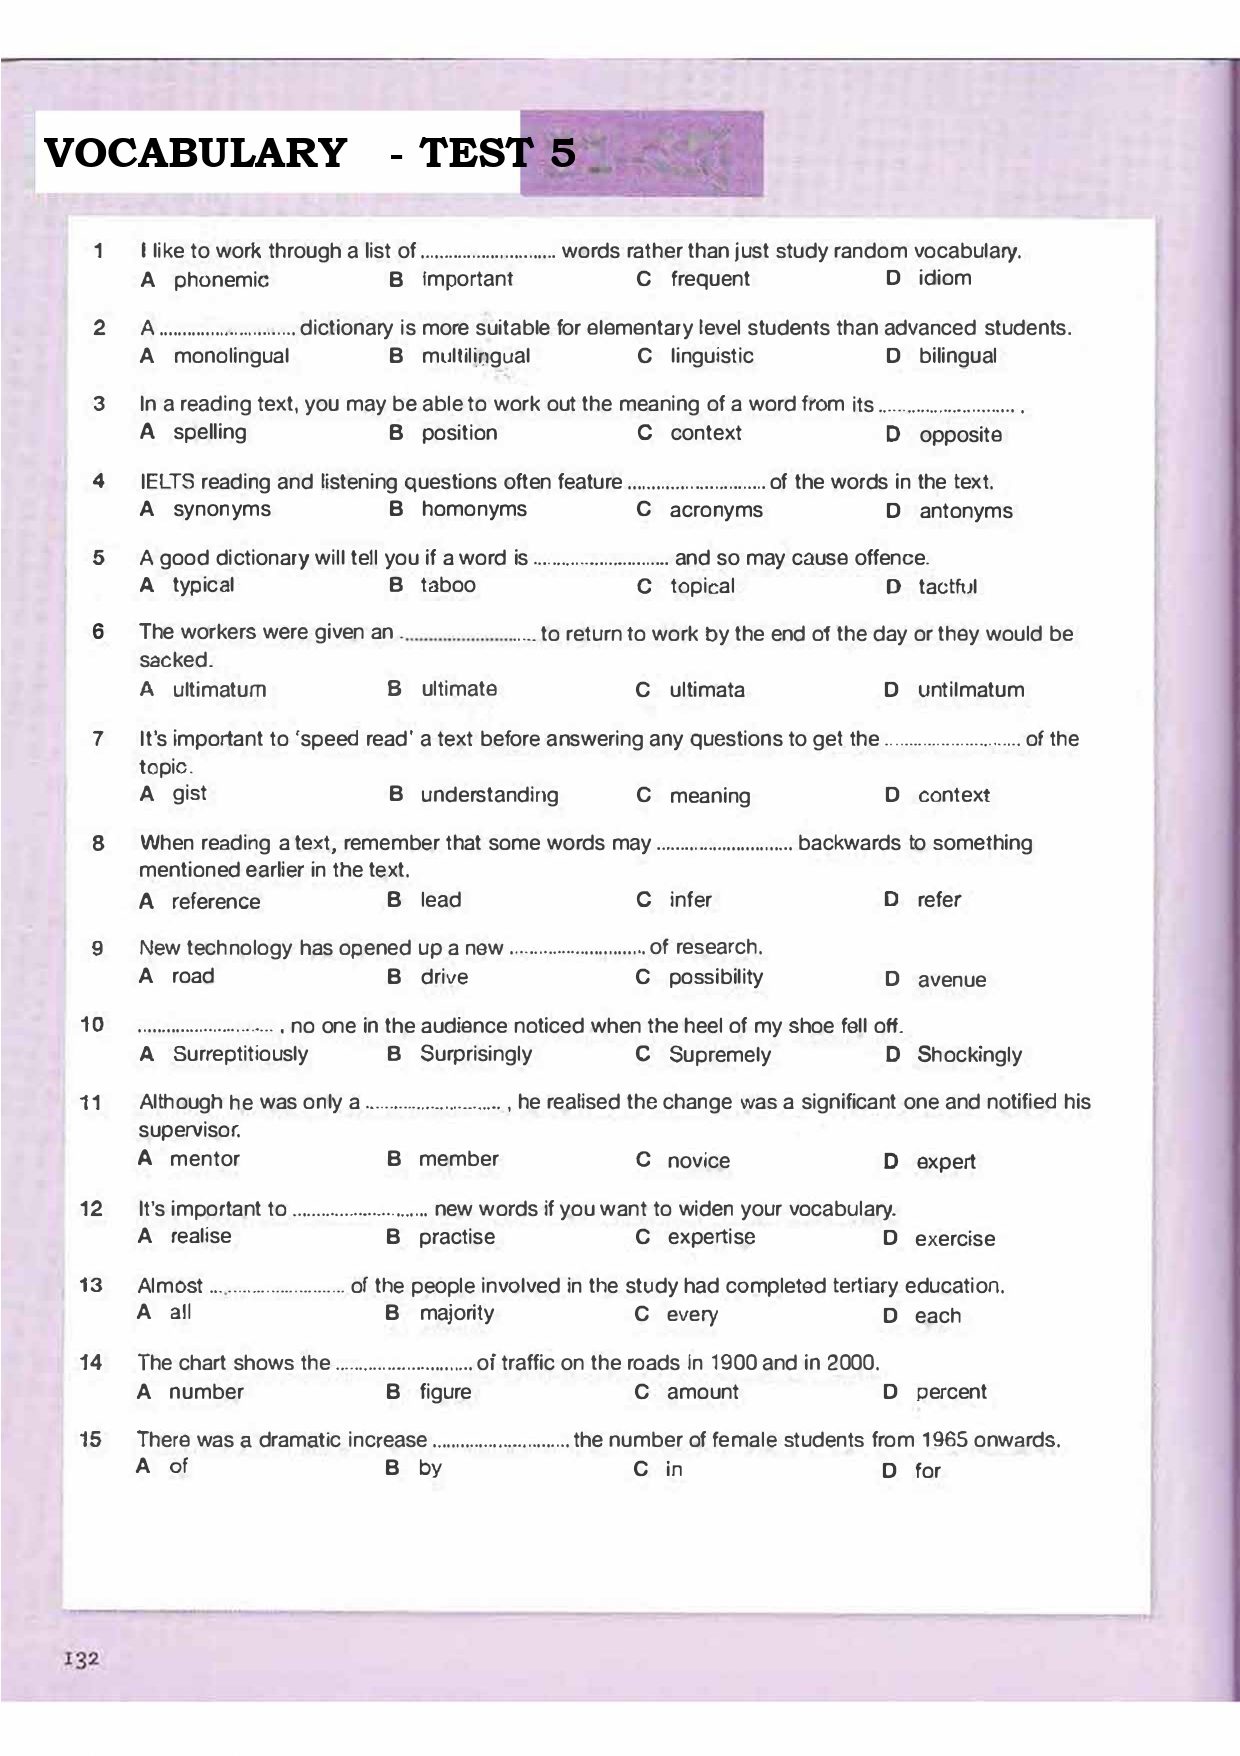 [tailieudieuky.com] Vocabulary tests for gifted students with key (13 pages)_page-0009